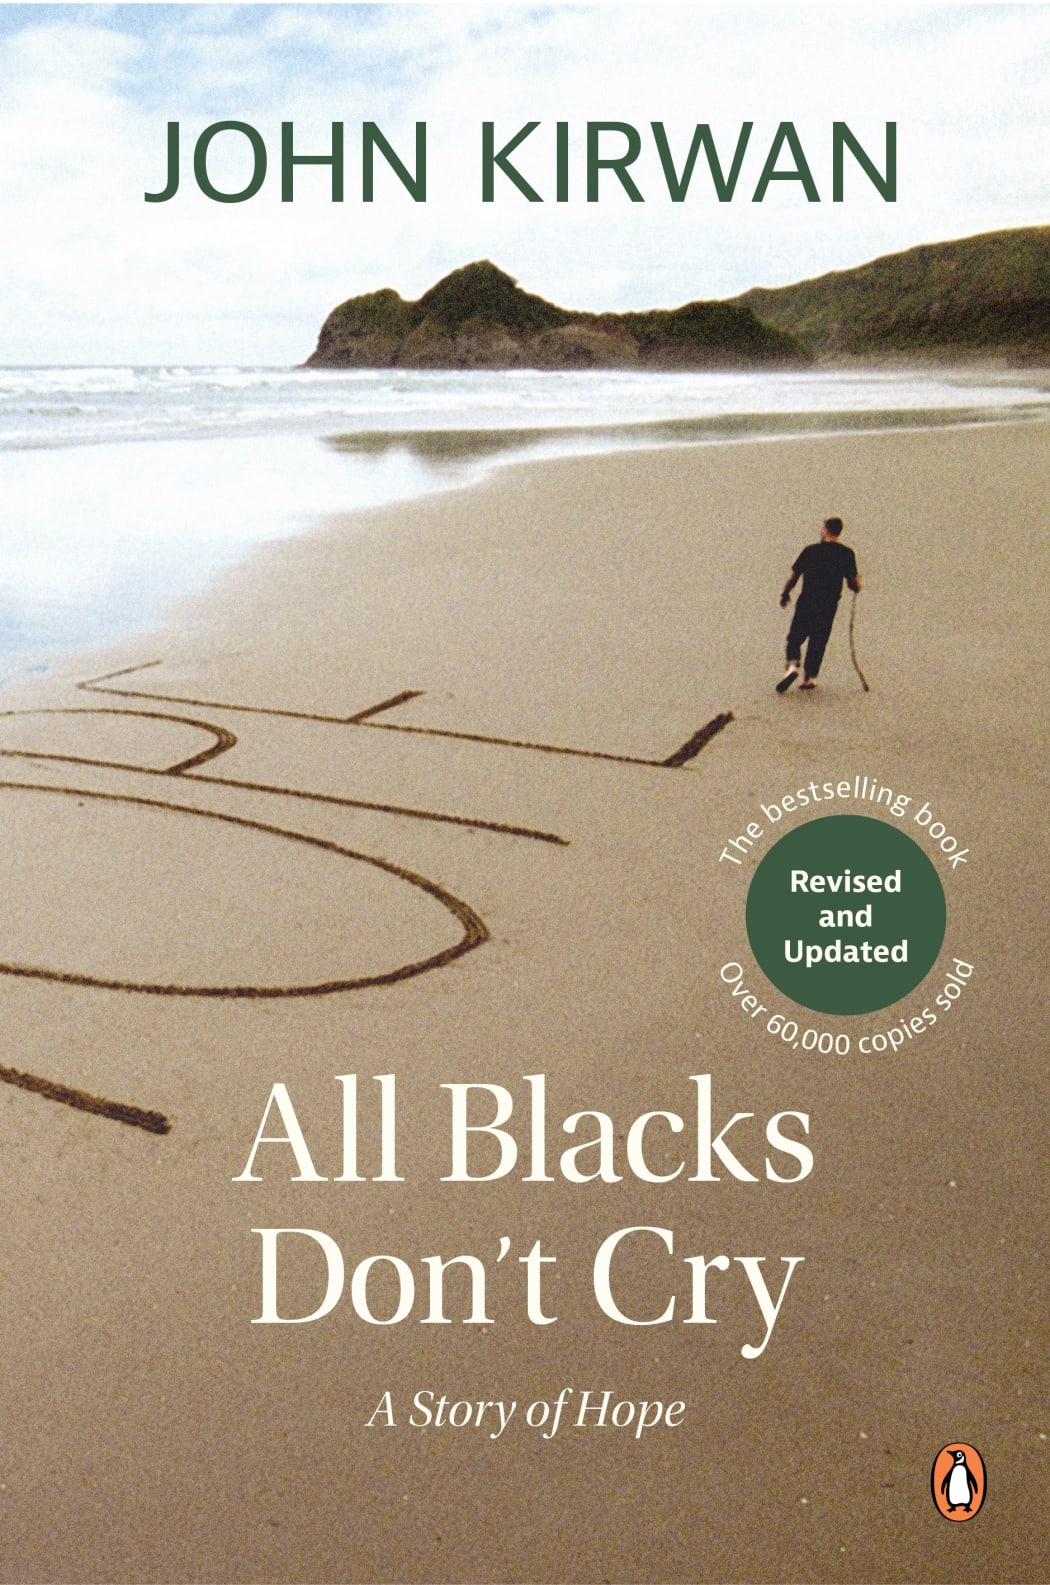 All Blacks Don't Cry book cover